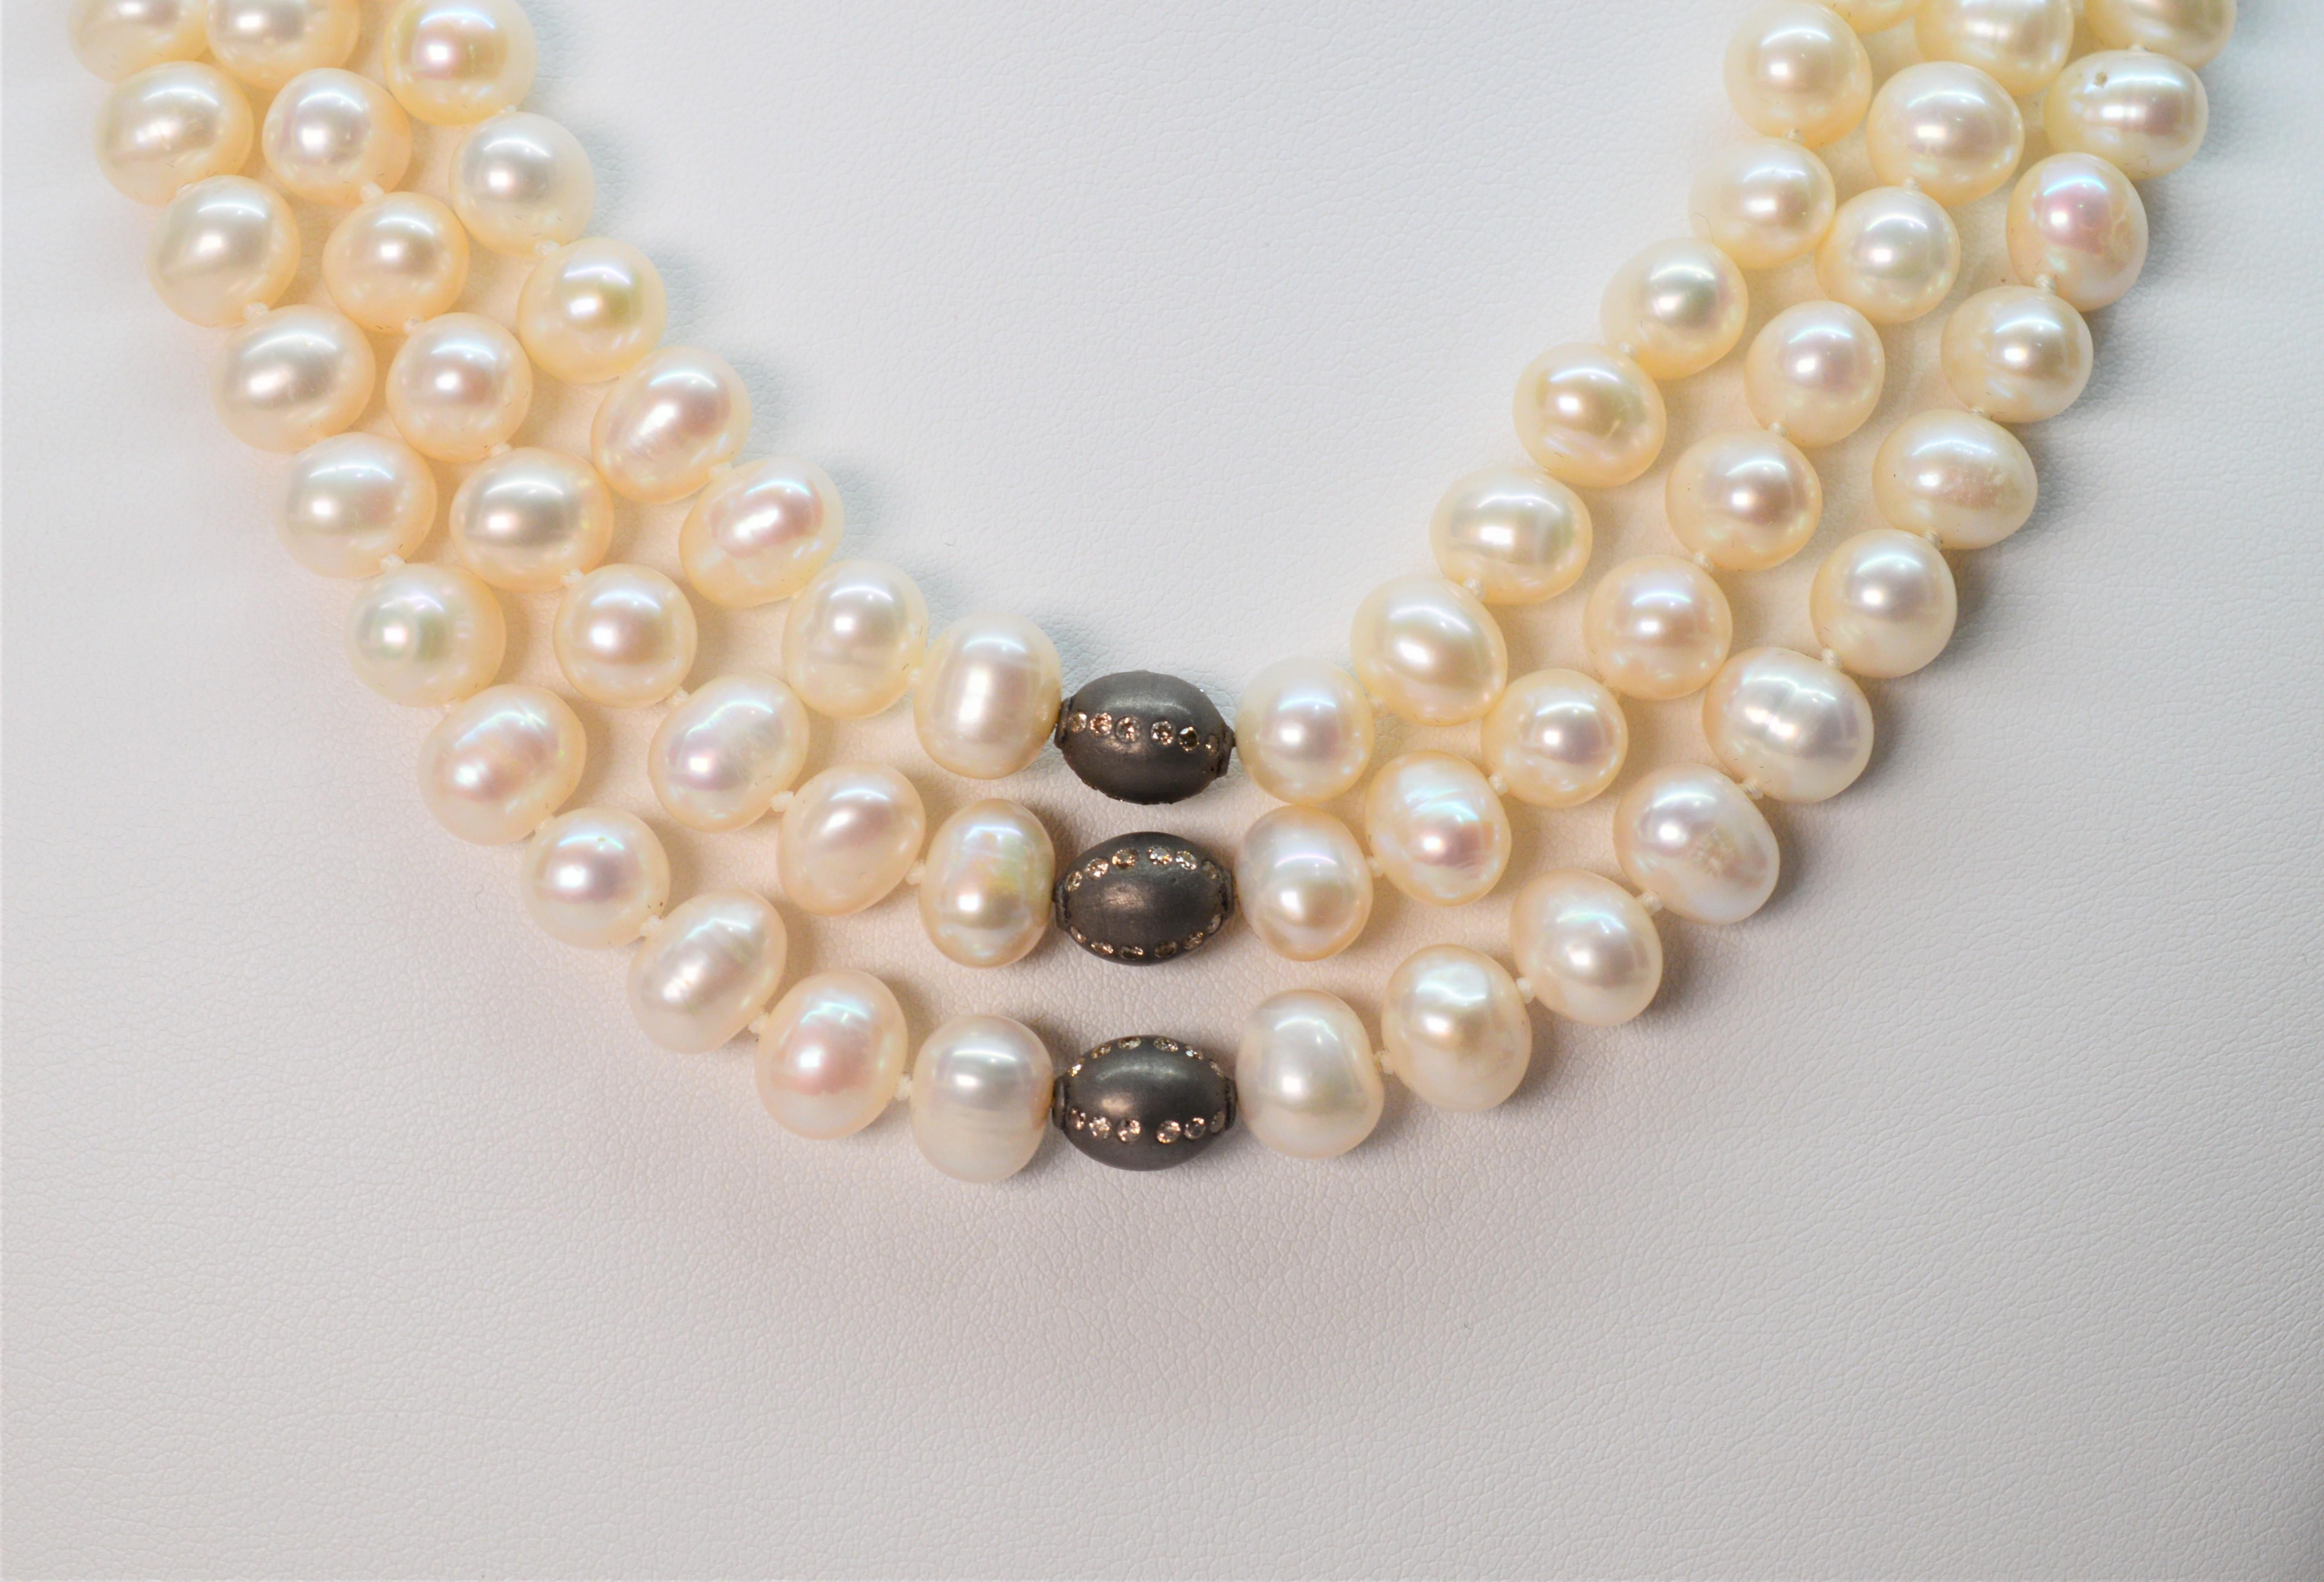 Three luscious strands of lustrous 8.5/9mm genuine creamy white button pearls beautifully drape to create this statement piece. A perfect accessory piece to elevate your wardrobe basics, each graduating pearl strand is defined with a unique diamond